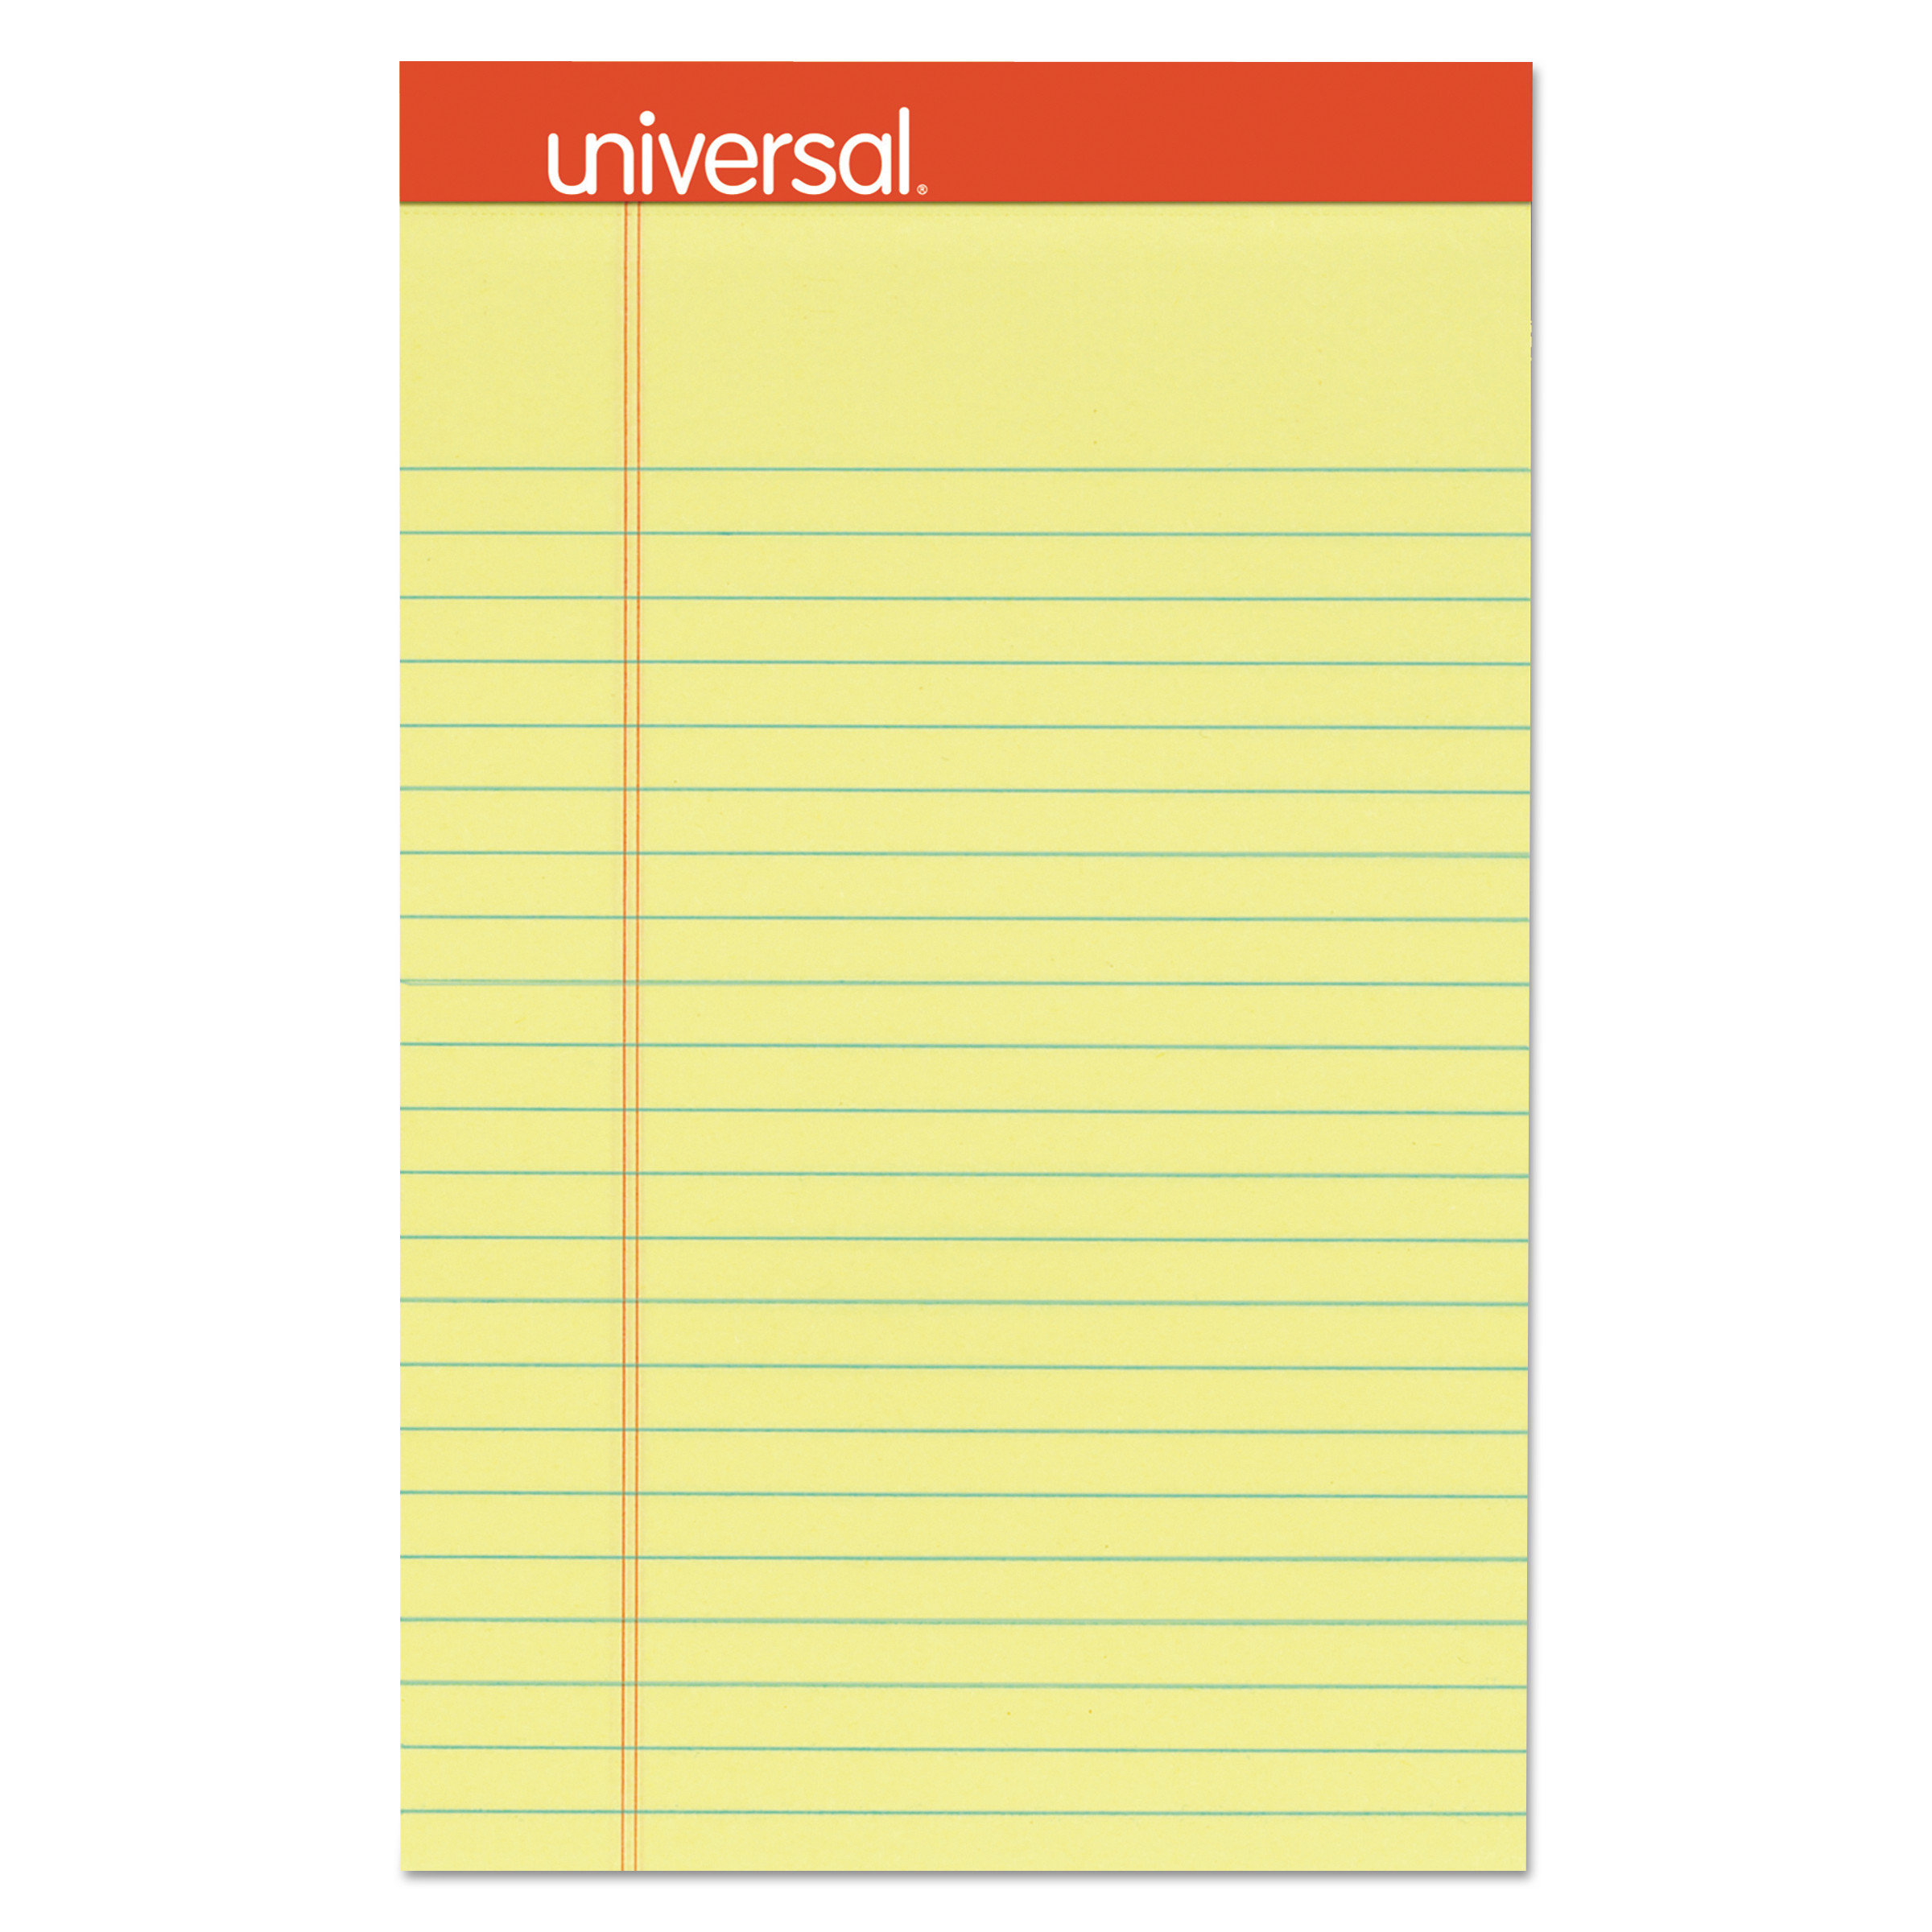  Universal M9-46200 Perforated Ruled Writing Pads, Narrow Rule, 5 x 8, Canary, 50 Sheets, Dozen (UNV46200) 